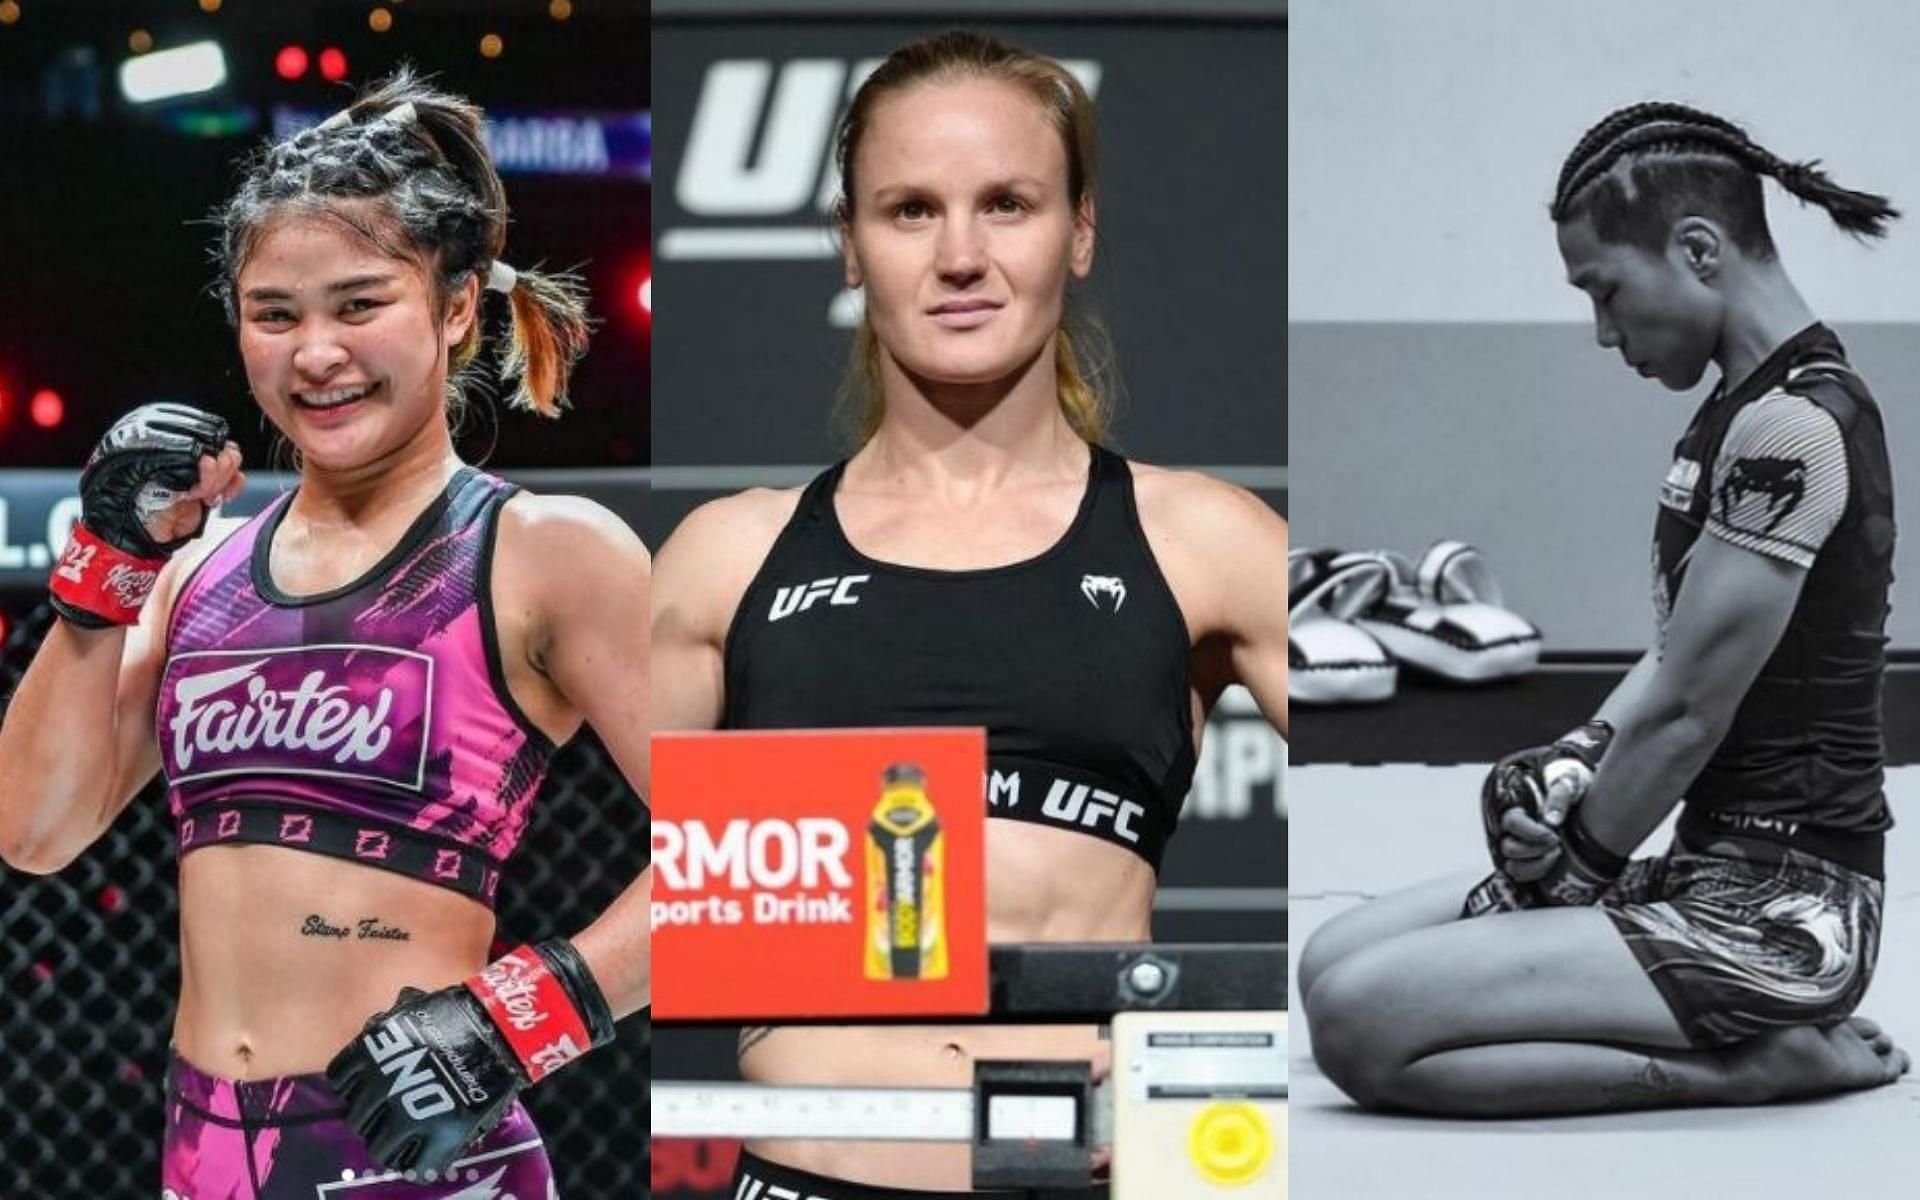 ONE Championship fighters Stamp Fairtex (left) and Xiong Jing Nan (right) pose interesting stylistic match-ups to UFC champion Valentina Shevchenko (middle). (Images credits: @stamp_fairtex, @bulletvalentina and @jingnanxiong on Instagram)